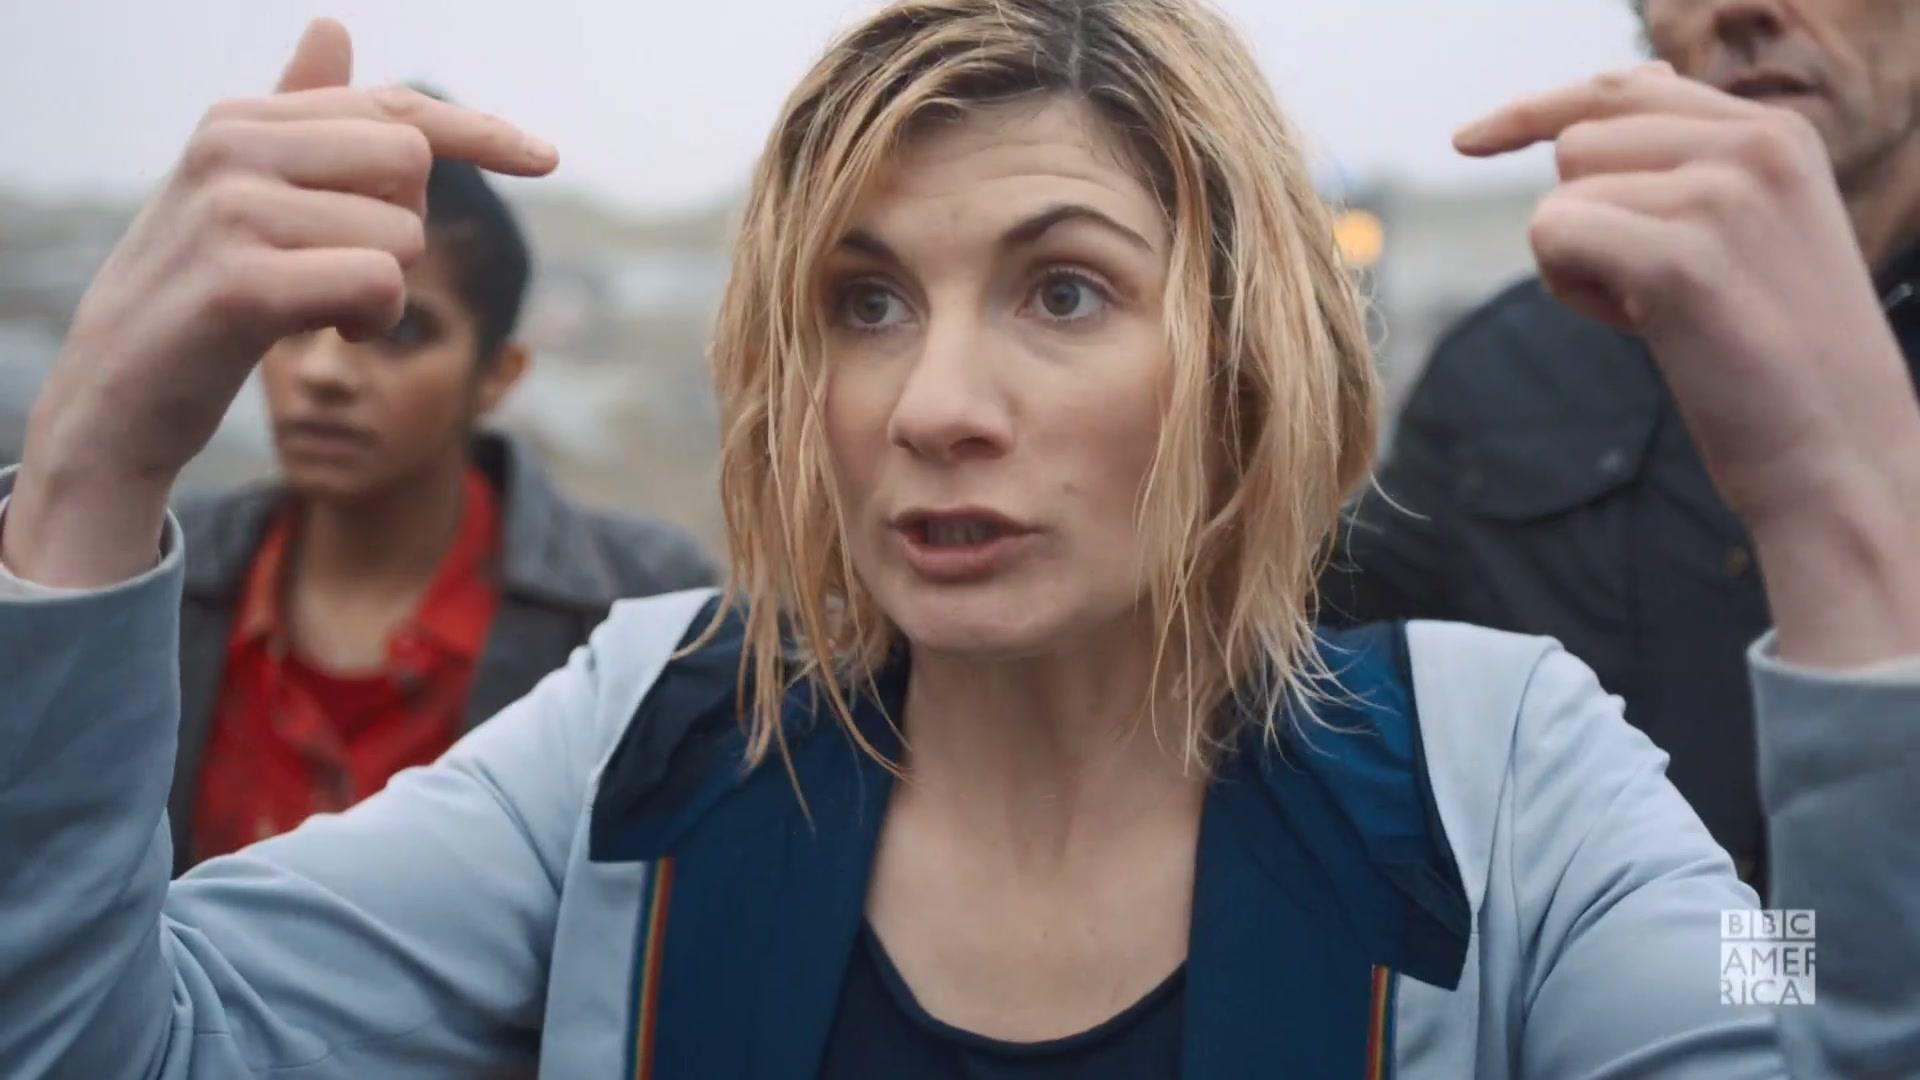 Watch NEW #DoctorWho Comic-Con Teaser | Doctor Who Video Extras